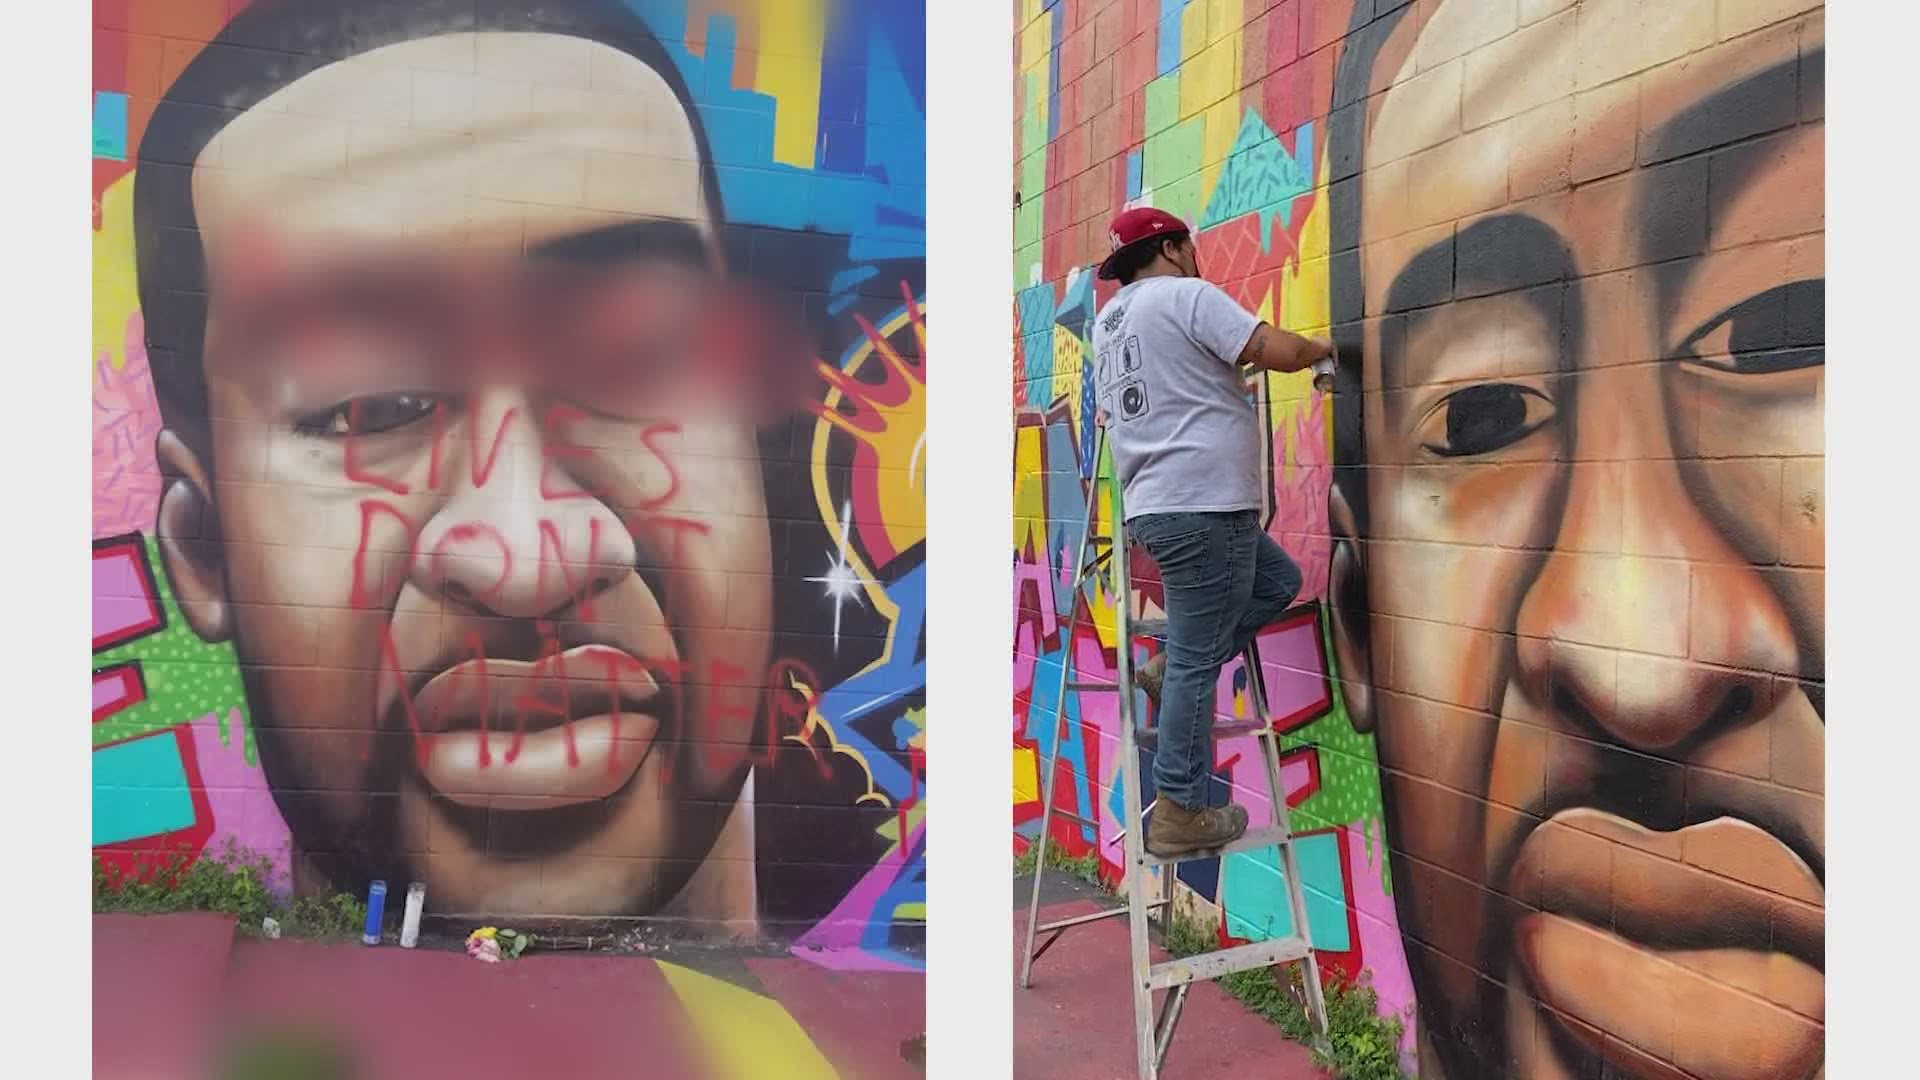 A George Floyd mural in downtown Houston was defaced Thursday with a racial slur. The artist later painted over the hateful message.